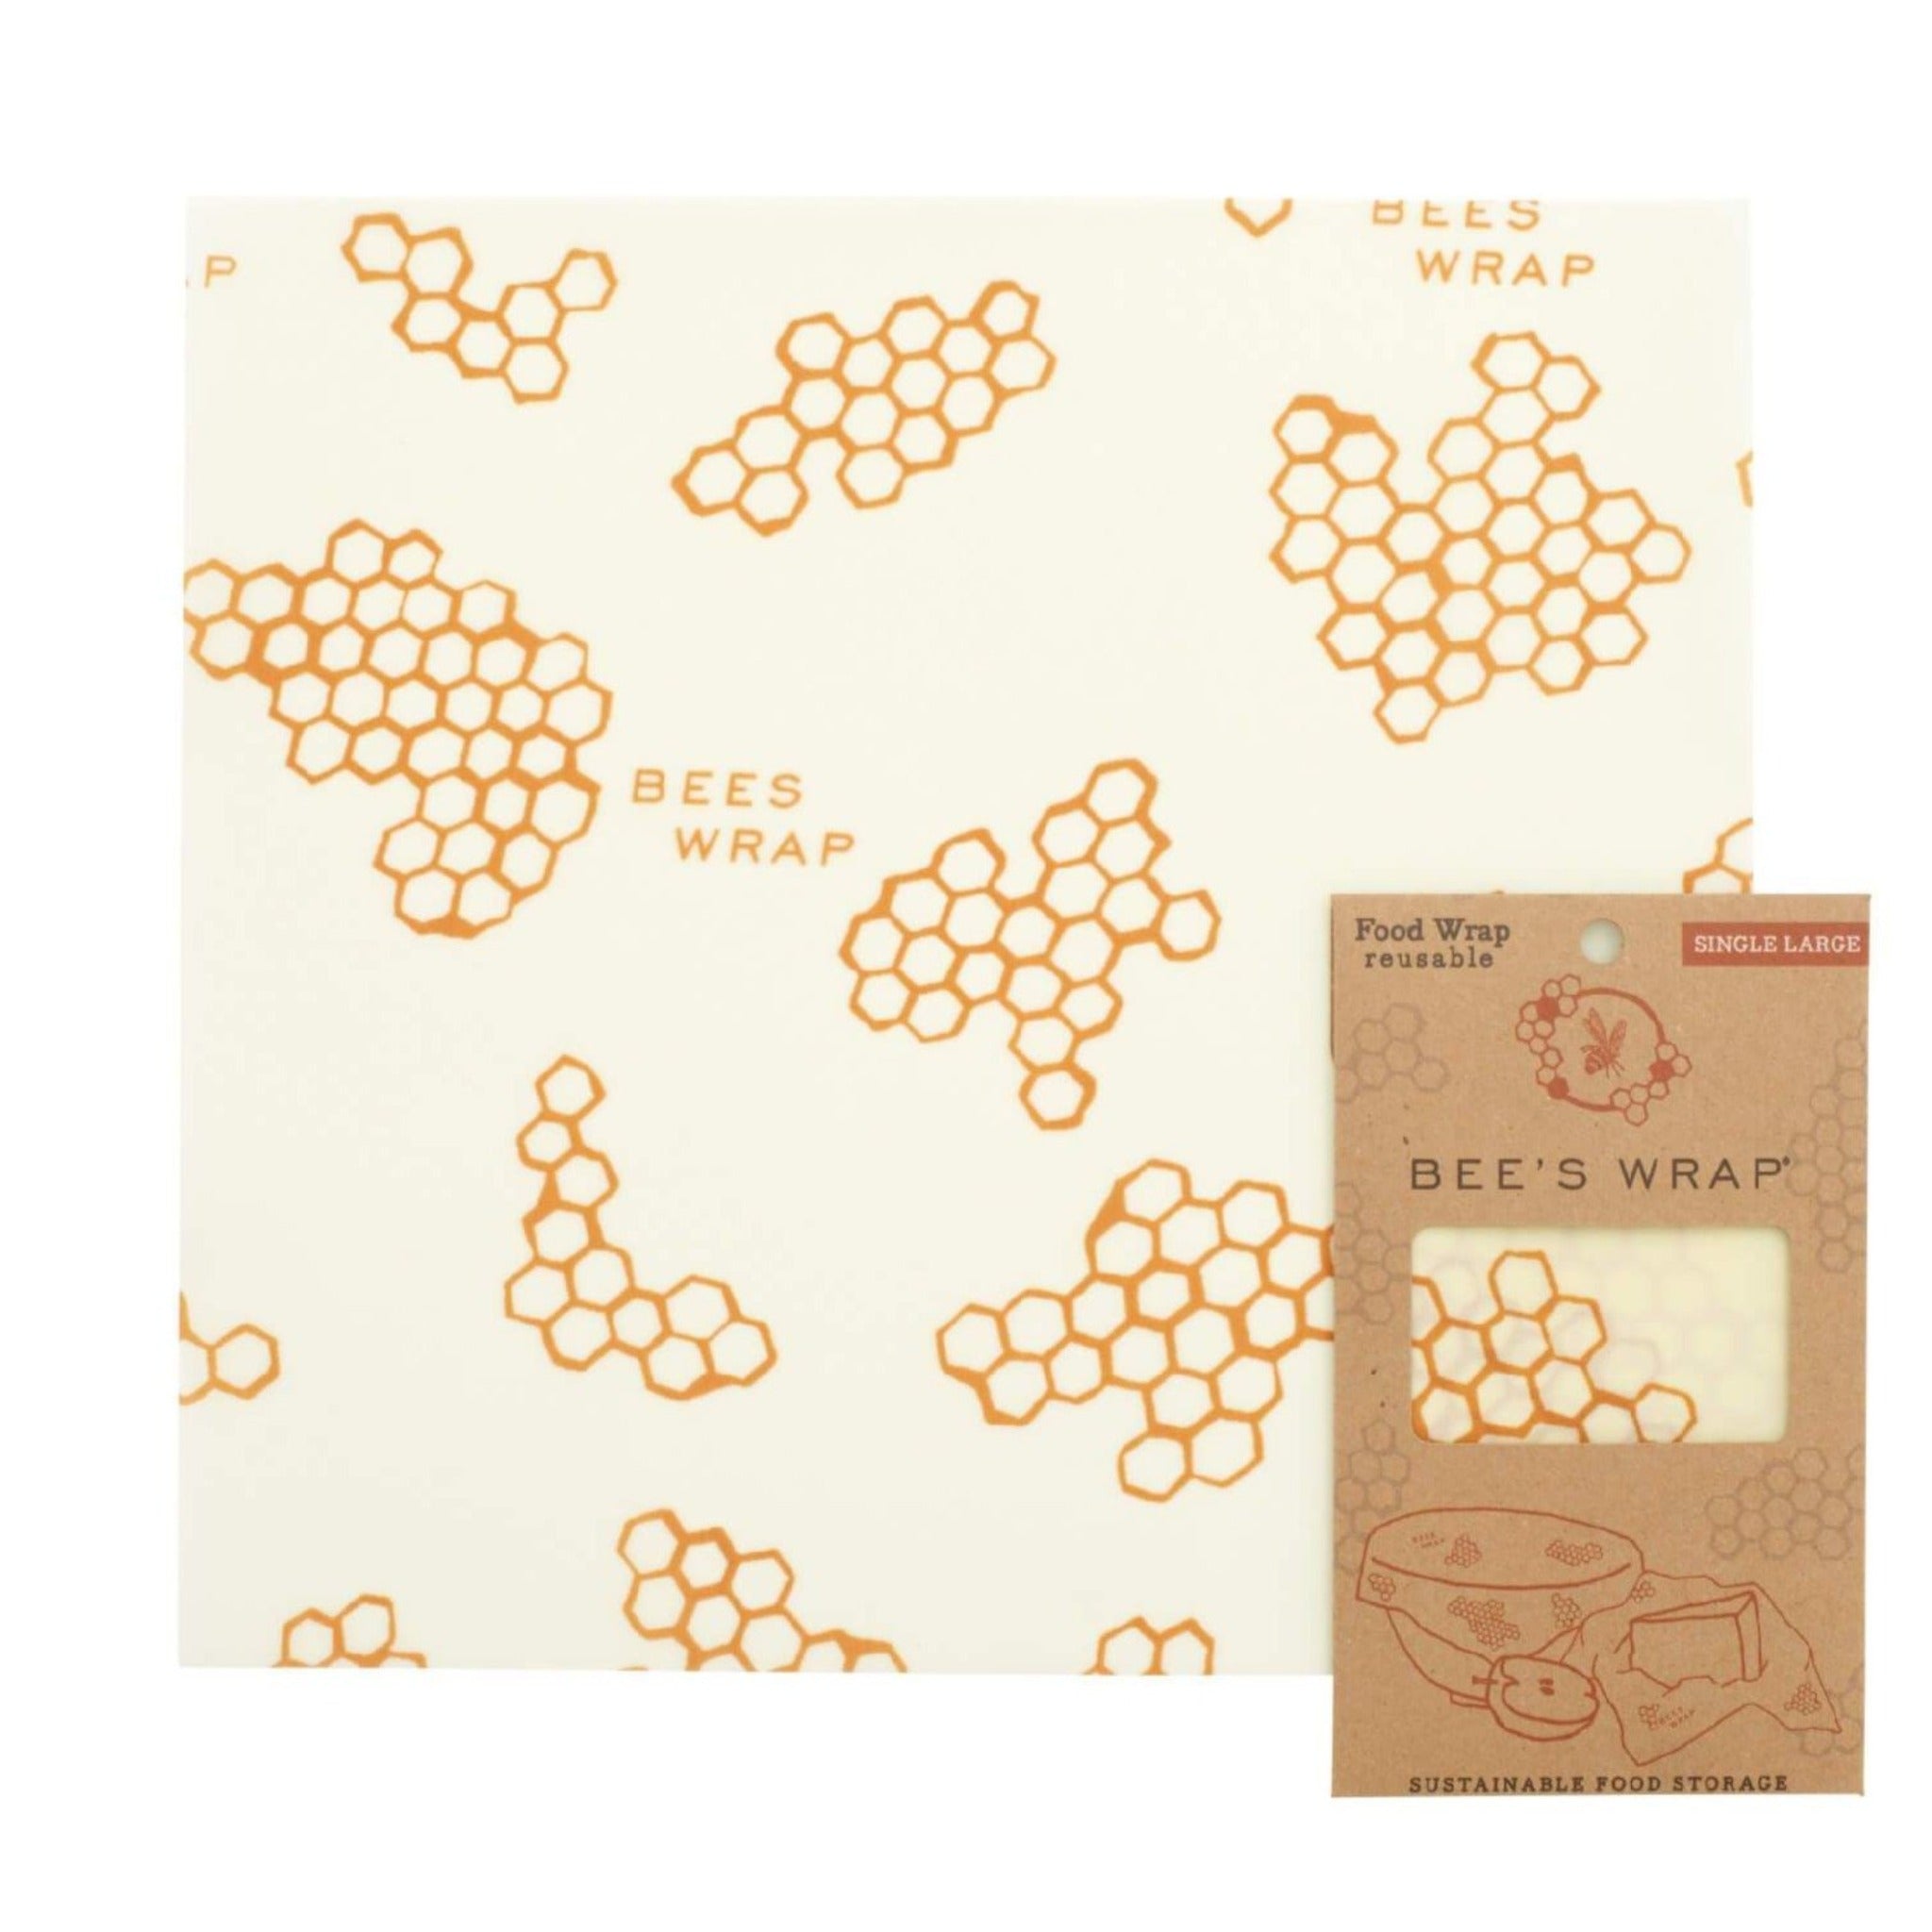 beeswax wrap large single next to package